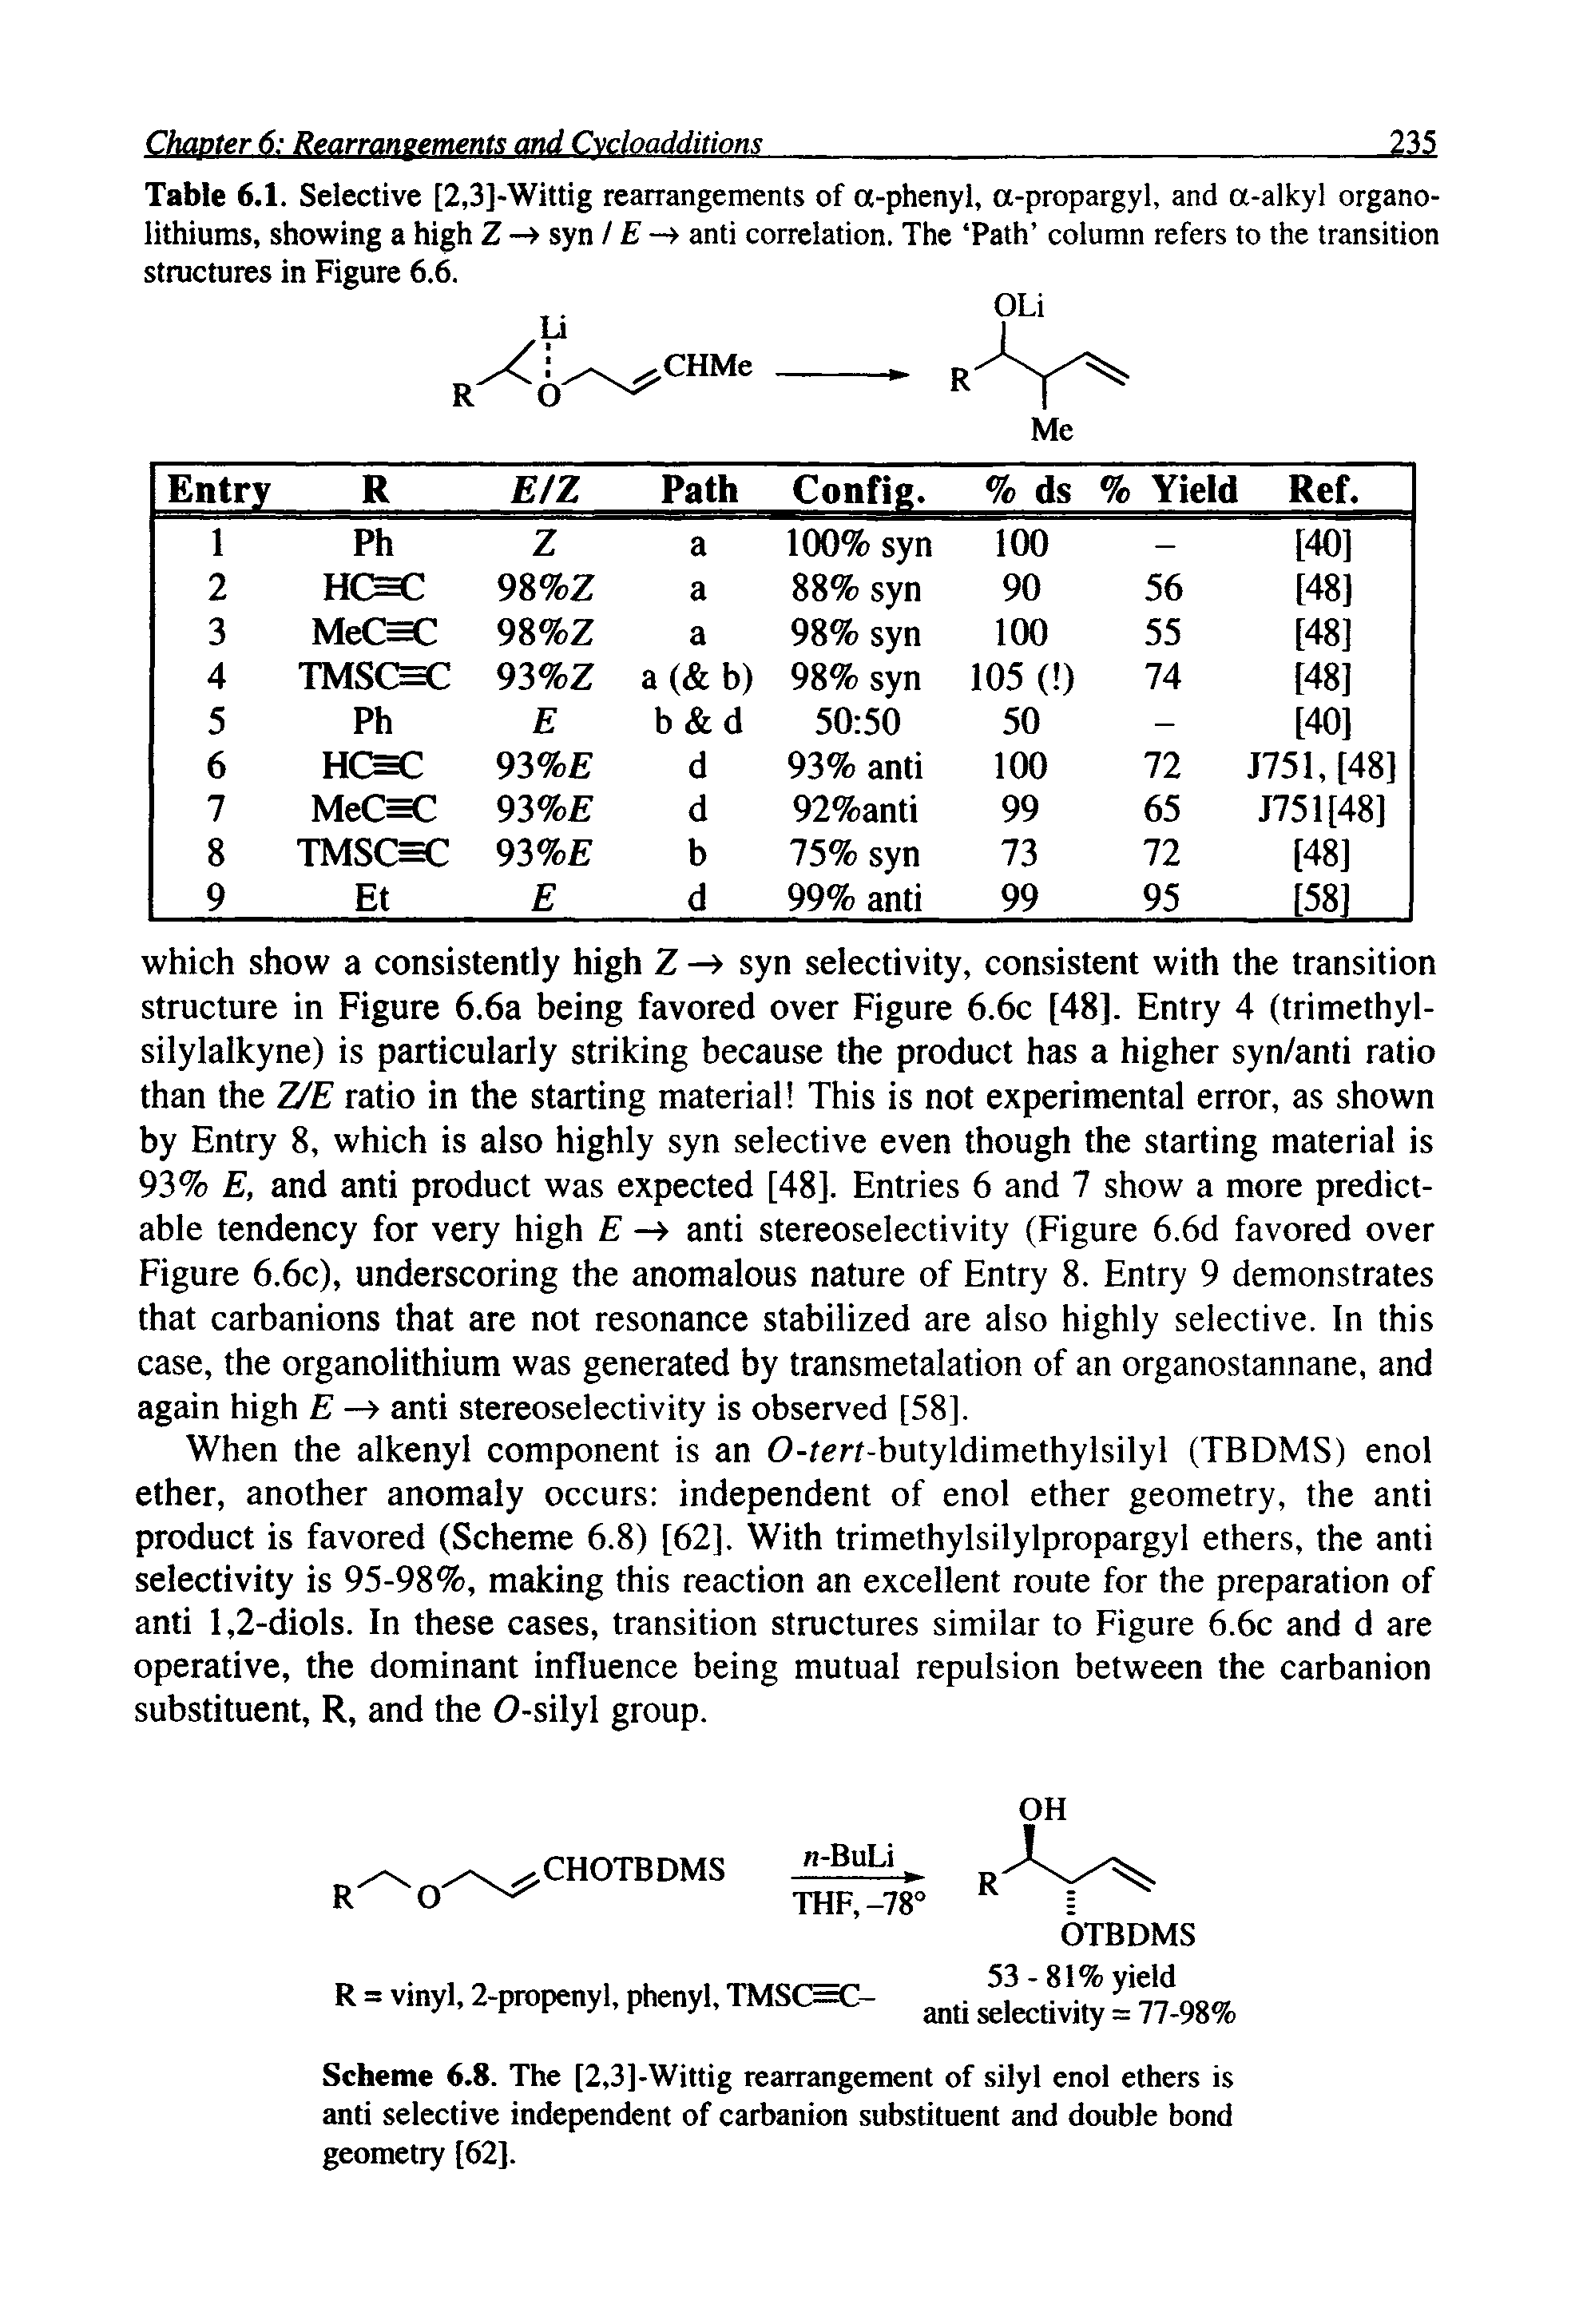 Scheme 6.8. The [2,3]-Wittig rearrangement of silyl enol ethers is anti selective independent of carbanion substituent and double bond geometry [62].